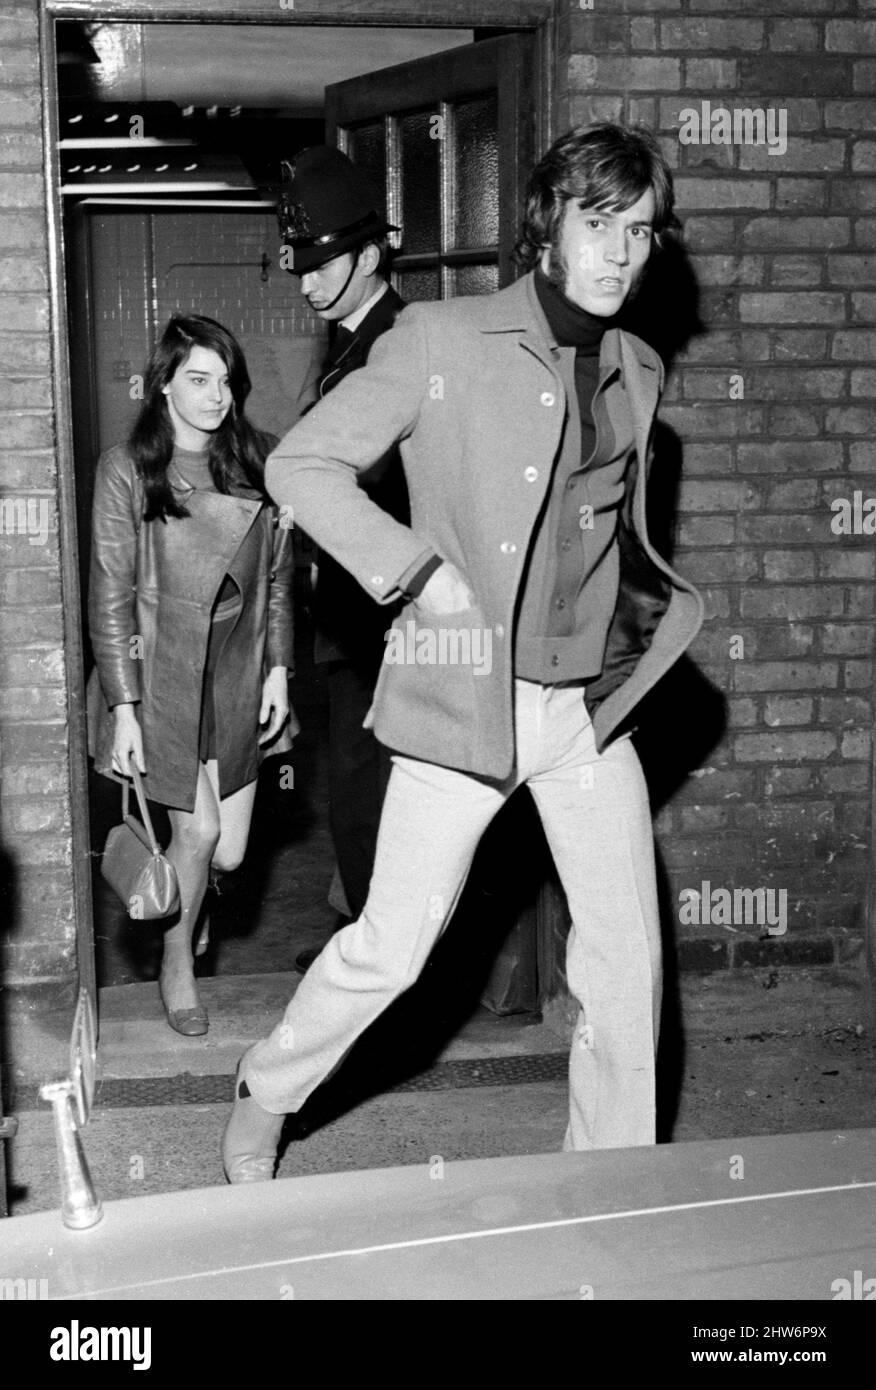 Pop star Barry Gibb, lead singer of the Bee Gees pop group pictured with his girlfriend Linda Gray as they leave Snow Hill police station. He was taken there after a revolver was fired outside his penthouse flat in the City of London October 1968 Stock Photo